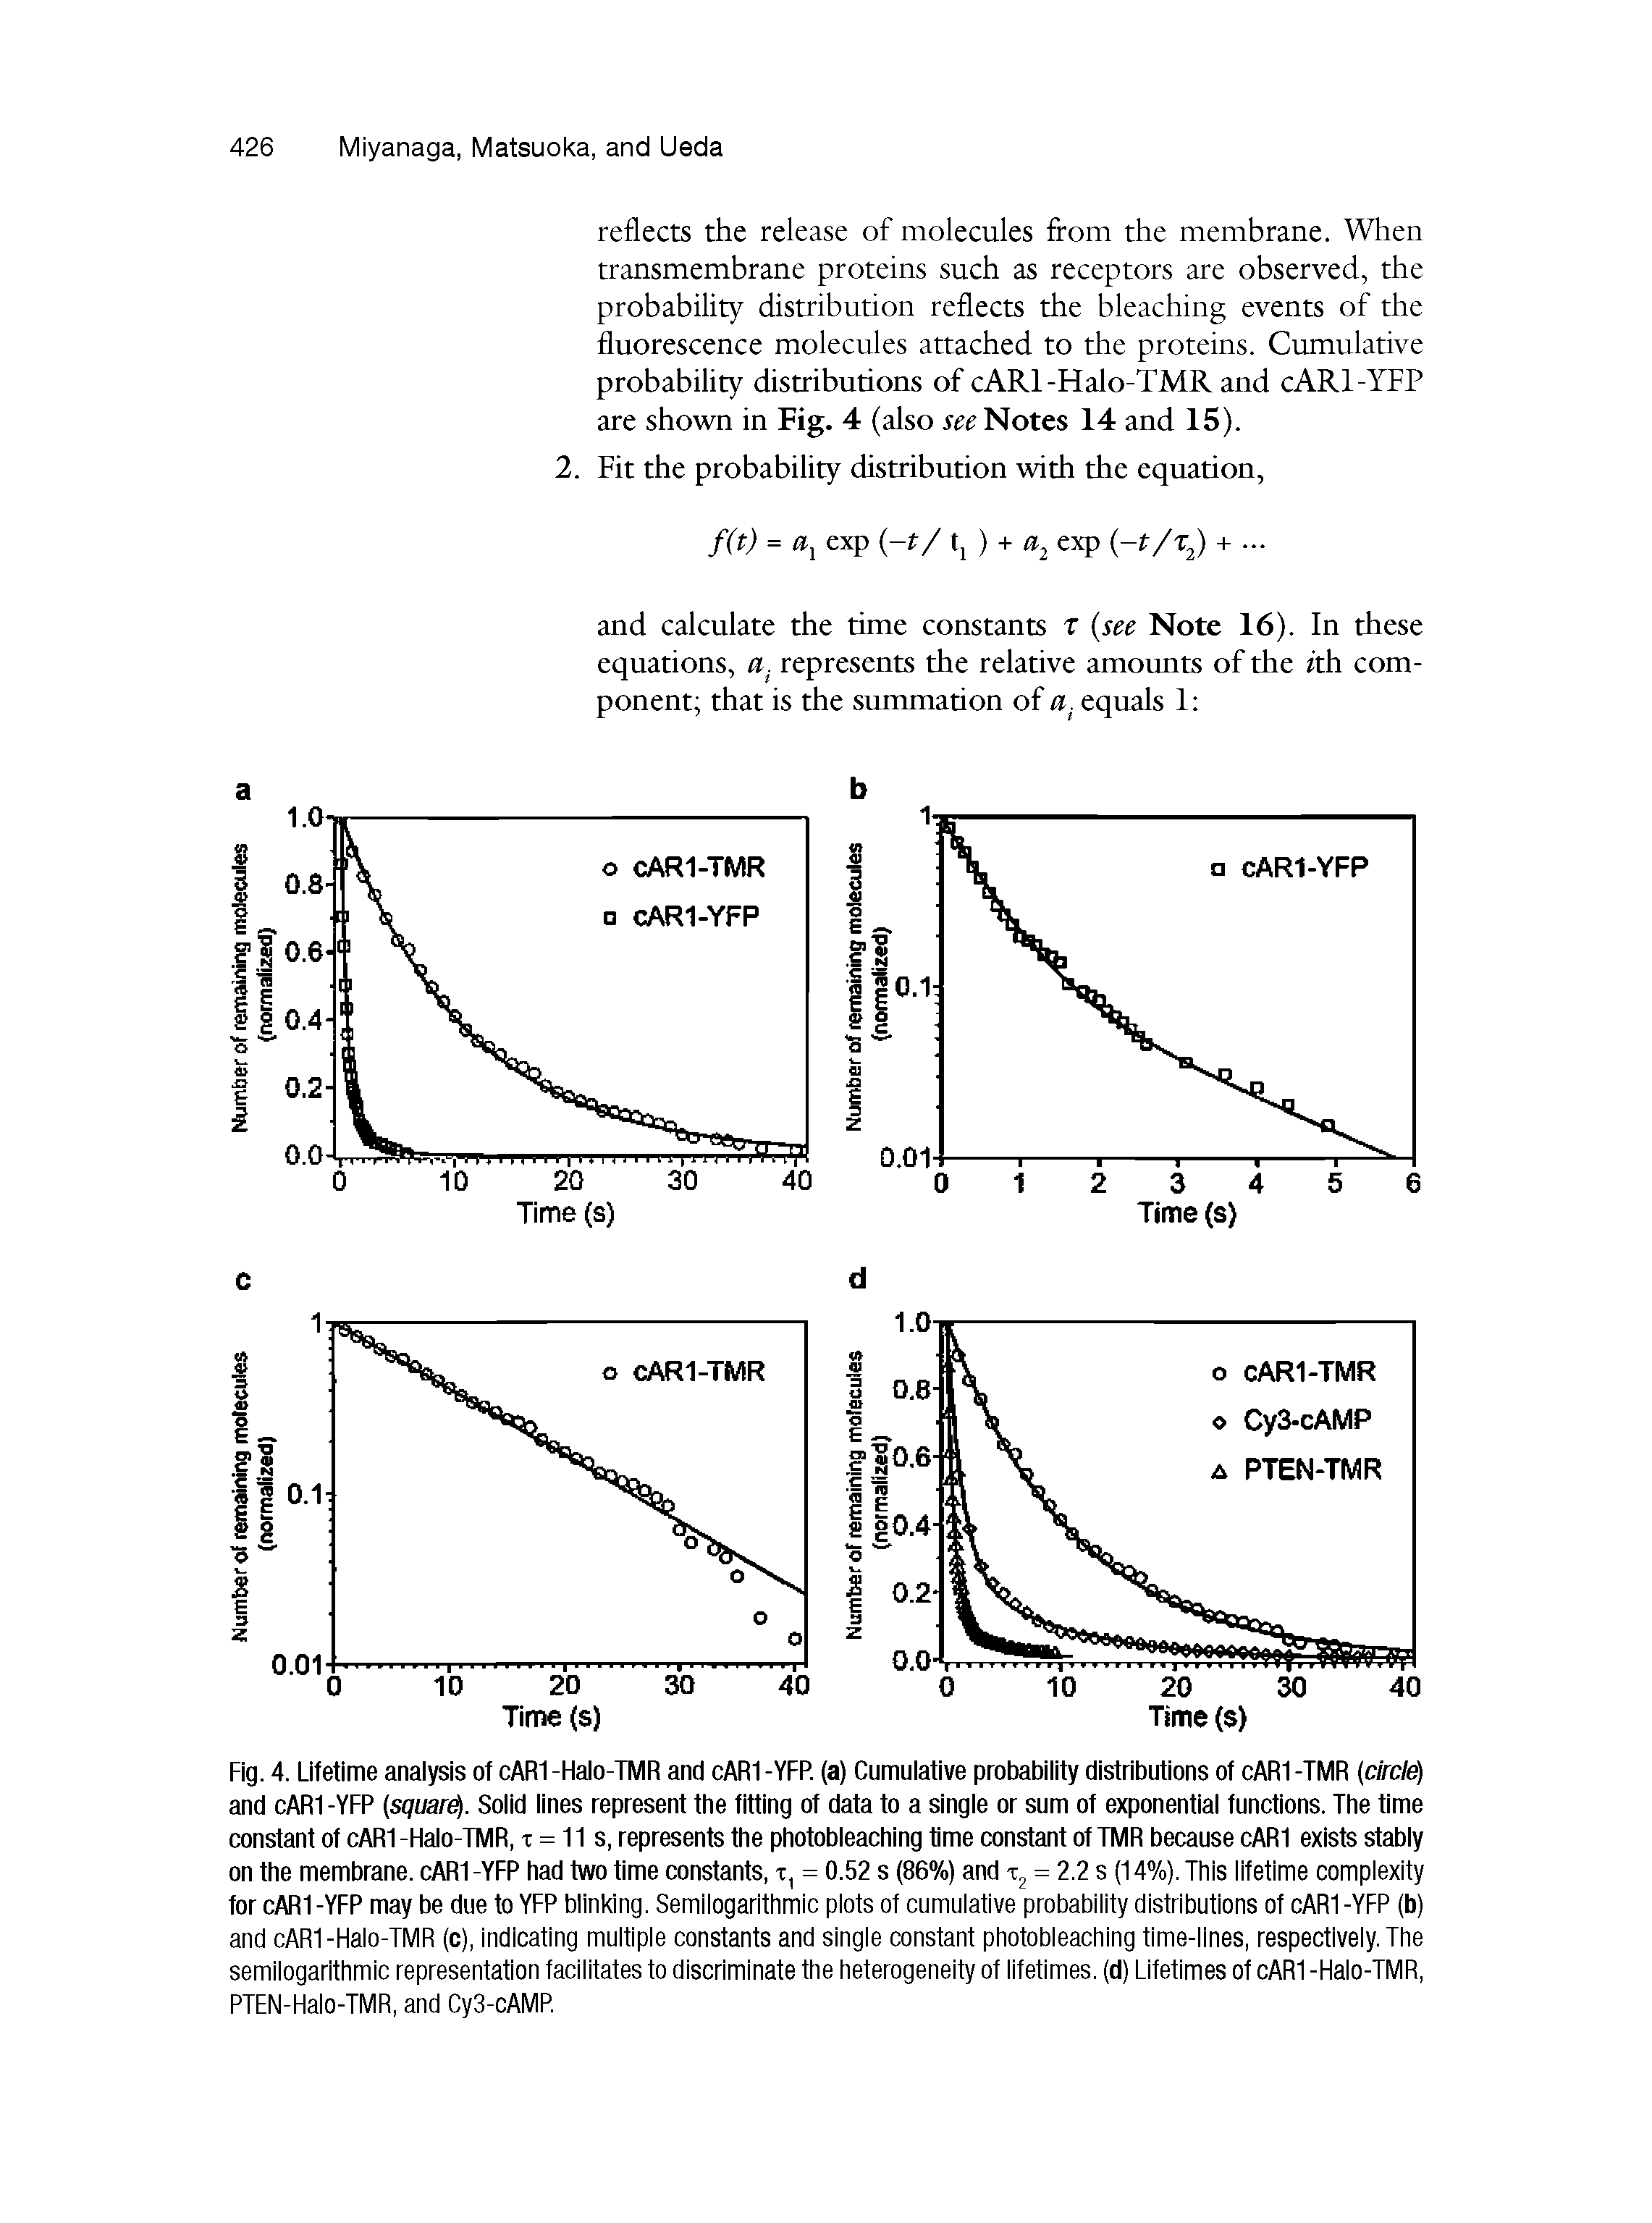 Fig. 4. Lifetime anaiysis of cARI-Haio-TMR and cARf-YFP. (a) Cumuiative probabiiity distributions of cARt-TMR (c/rc/e) and cARt -YFP (squar. Soiid iines represent the fitting of data to a singie or sum of exponentiai functions. The time constant of cARt -Haio-TMR, x = 11 s, represents the photobieaching time constant of TMR because cARt exists stabiy on the membrane. cARt -YFP had two time constants, x, = 0.52 s (86%) and x = 2.2 s (14%). This lifetime complexity for cARt -YFP may be due to YFP blinking. Semilogarithmic plots of cumulative probability distributions of cARI -YFP (b) and cARI-Haio-TMR (c), indicating multiple constants and single constant photobieaching time-lines, respectively. The semilogarithmic representation facilitates to discriminate the heterogeneity of lifetimes, (d) Lifetimes of cARI -Haio-TMR, PTEN-Halo-TMR, and Cy3-cAMP.